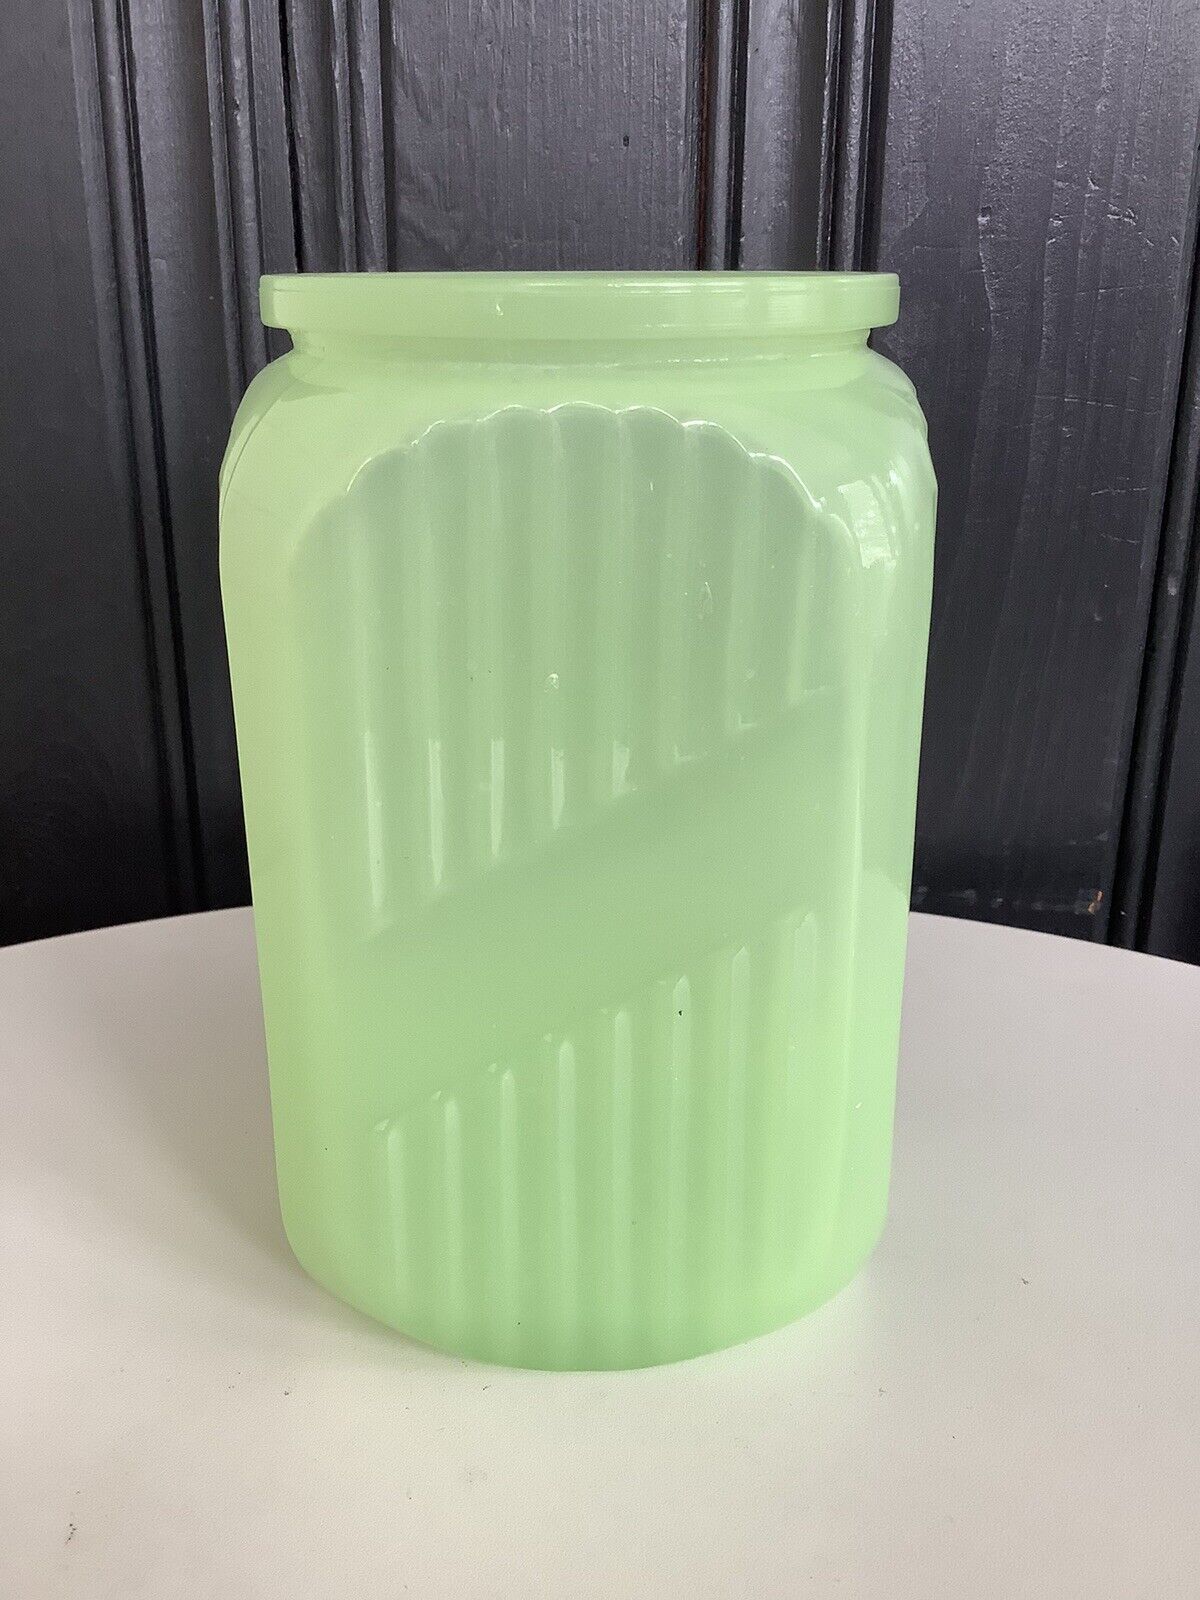 Vintage Jadeite Canister Clambroth Green Glass Jeanette McKee Hocking Fire King?